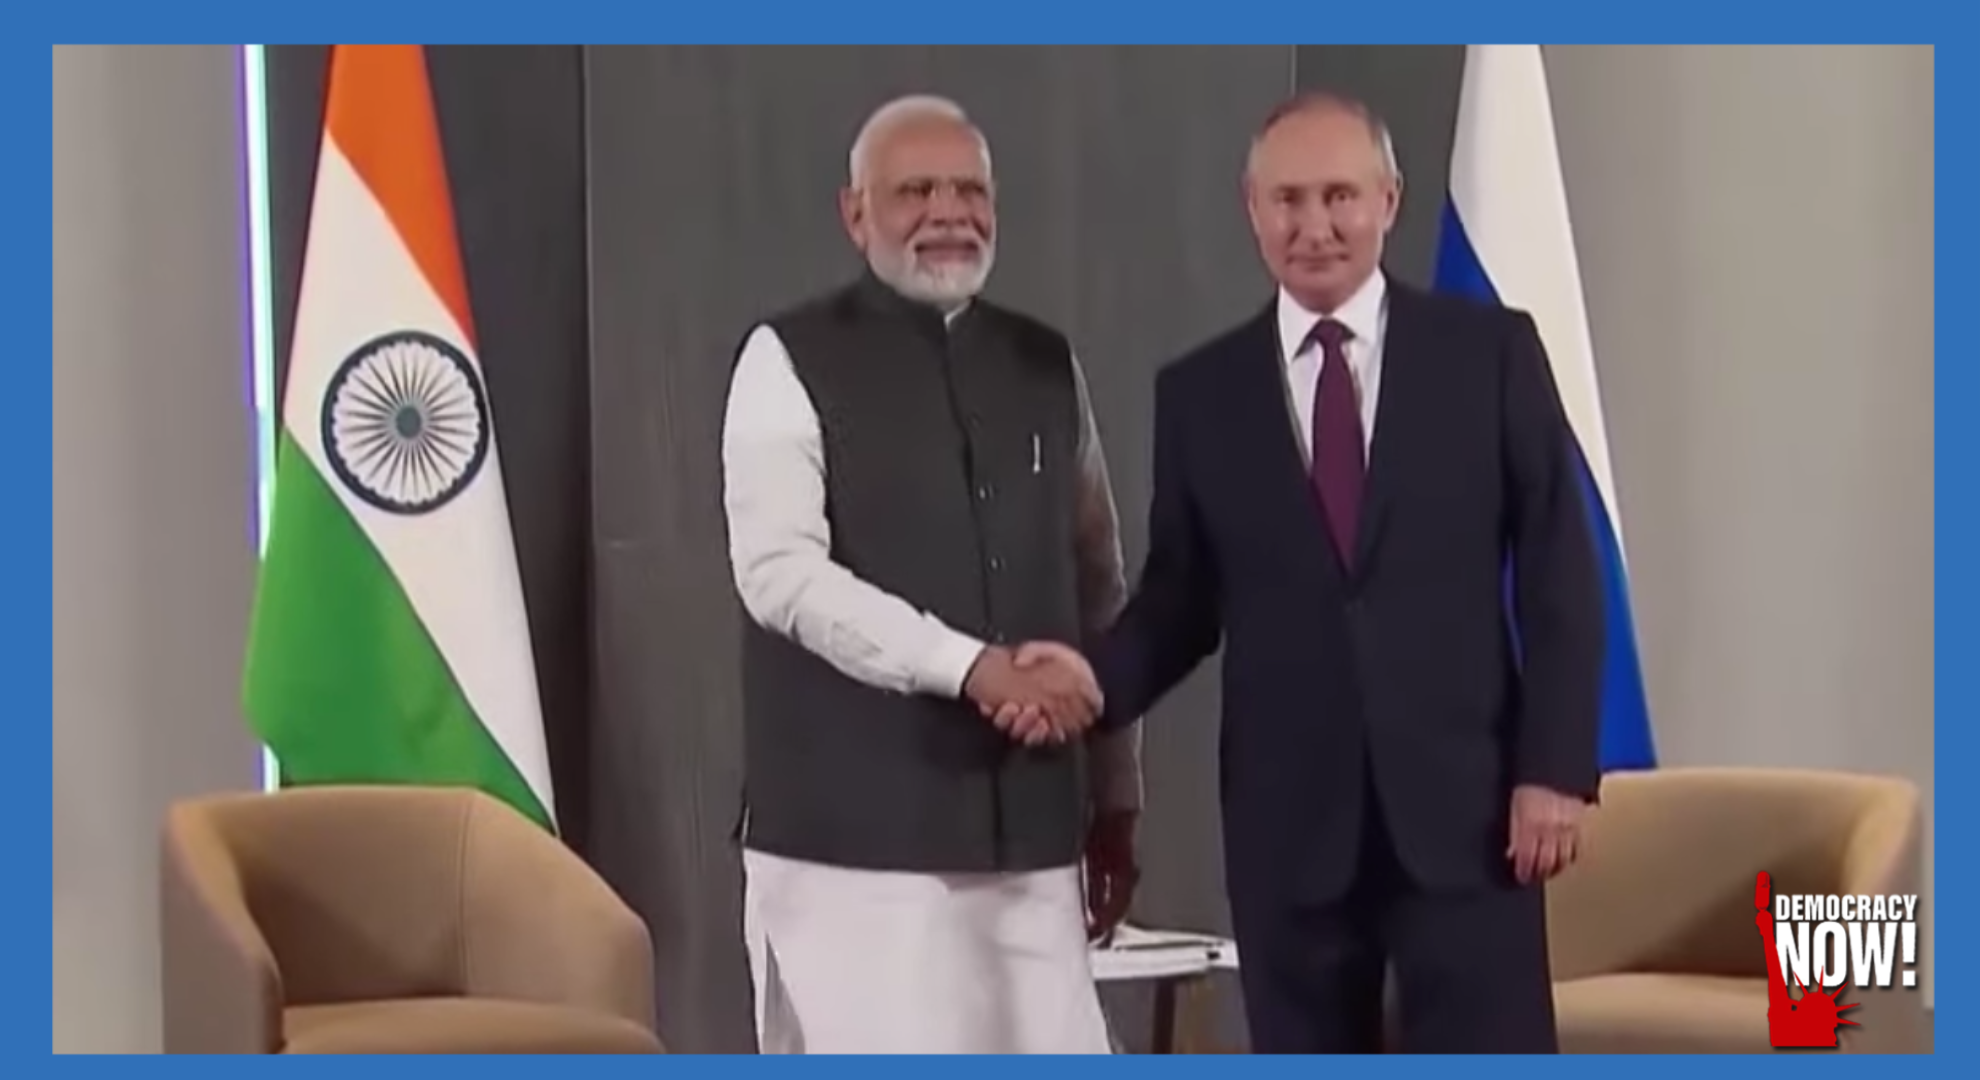 Walking a Tightrope on Ukraine: How India Is Balancing Ties to Russia & United States